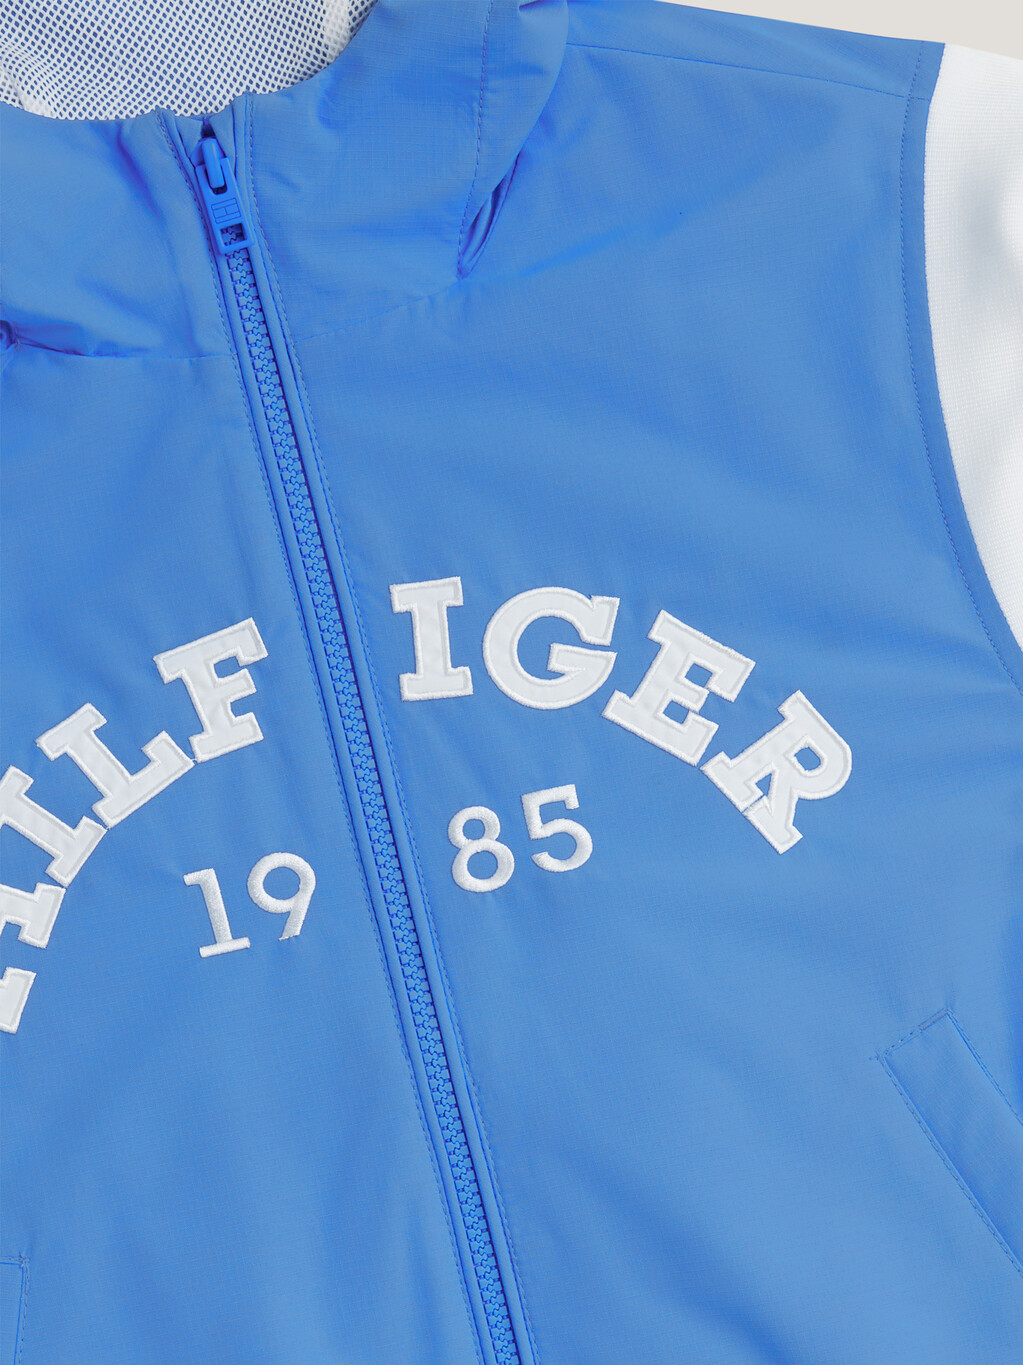 Hilfiger Monotype 1985 Collection Bomber Jacket, Blue Spell, hi-res